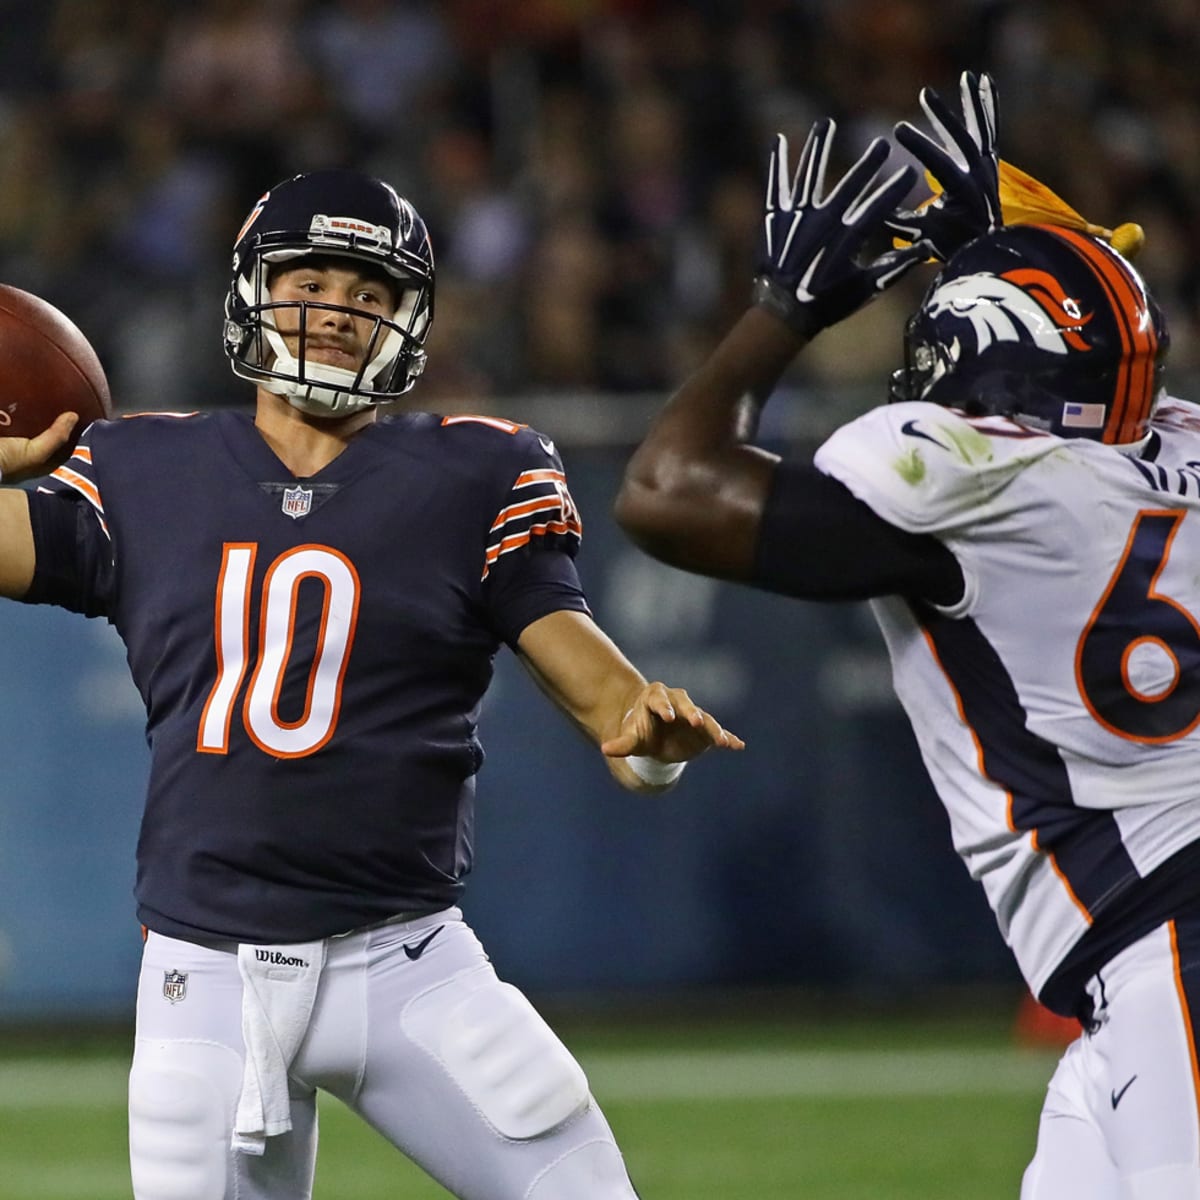 Bears rookie Mitchell Trubisky ready to take starting role